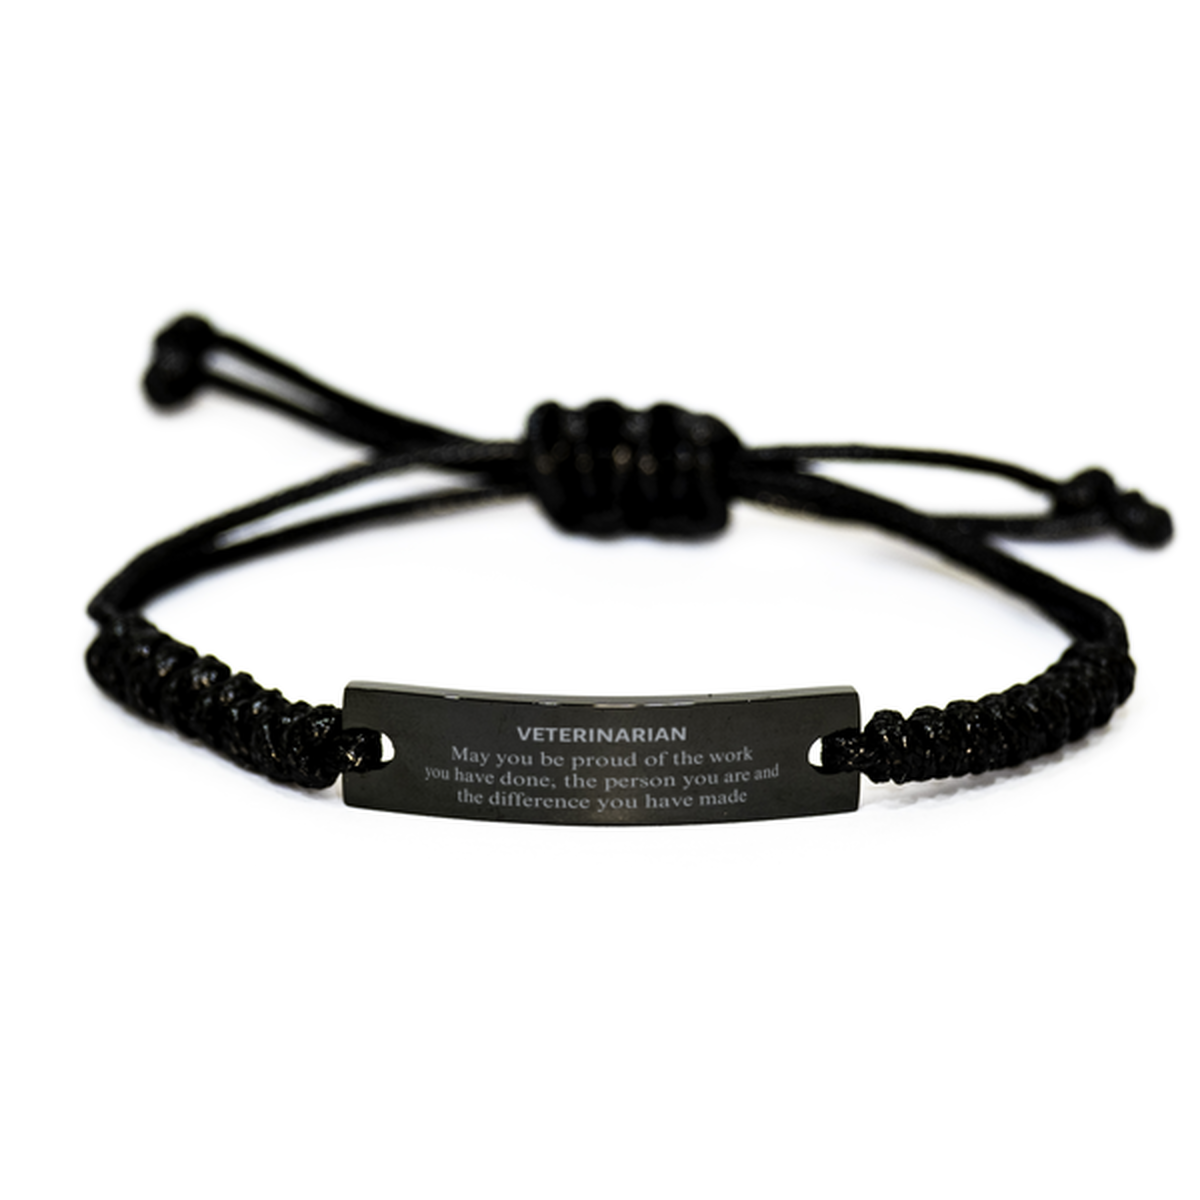 Veterinarian May you be proud of the work you have done, Retirement Veterinarian Black Rope Bracelet for Colleague Appreciation Gifts Amazing for Veterinarian